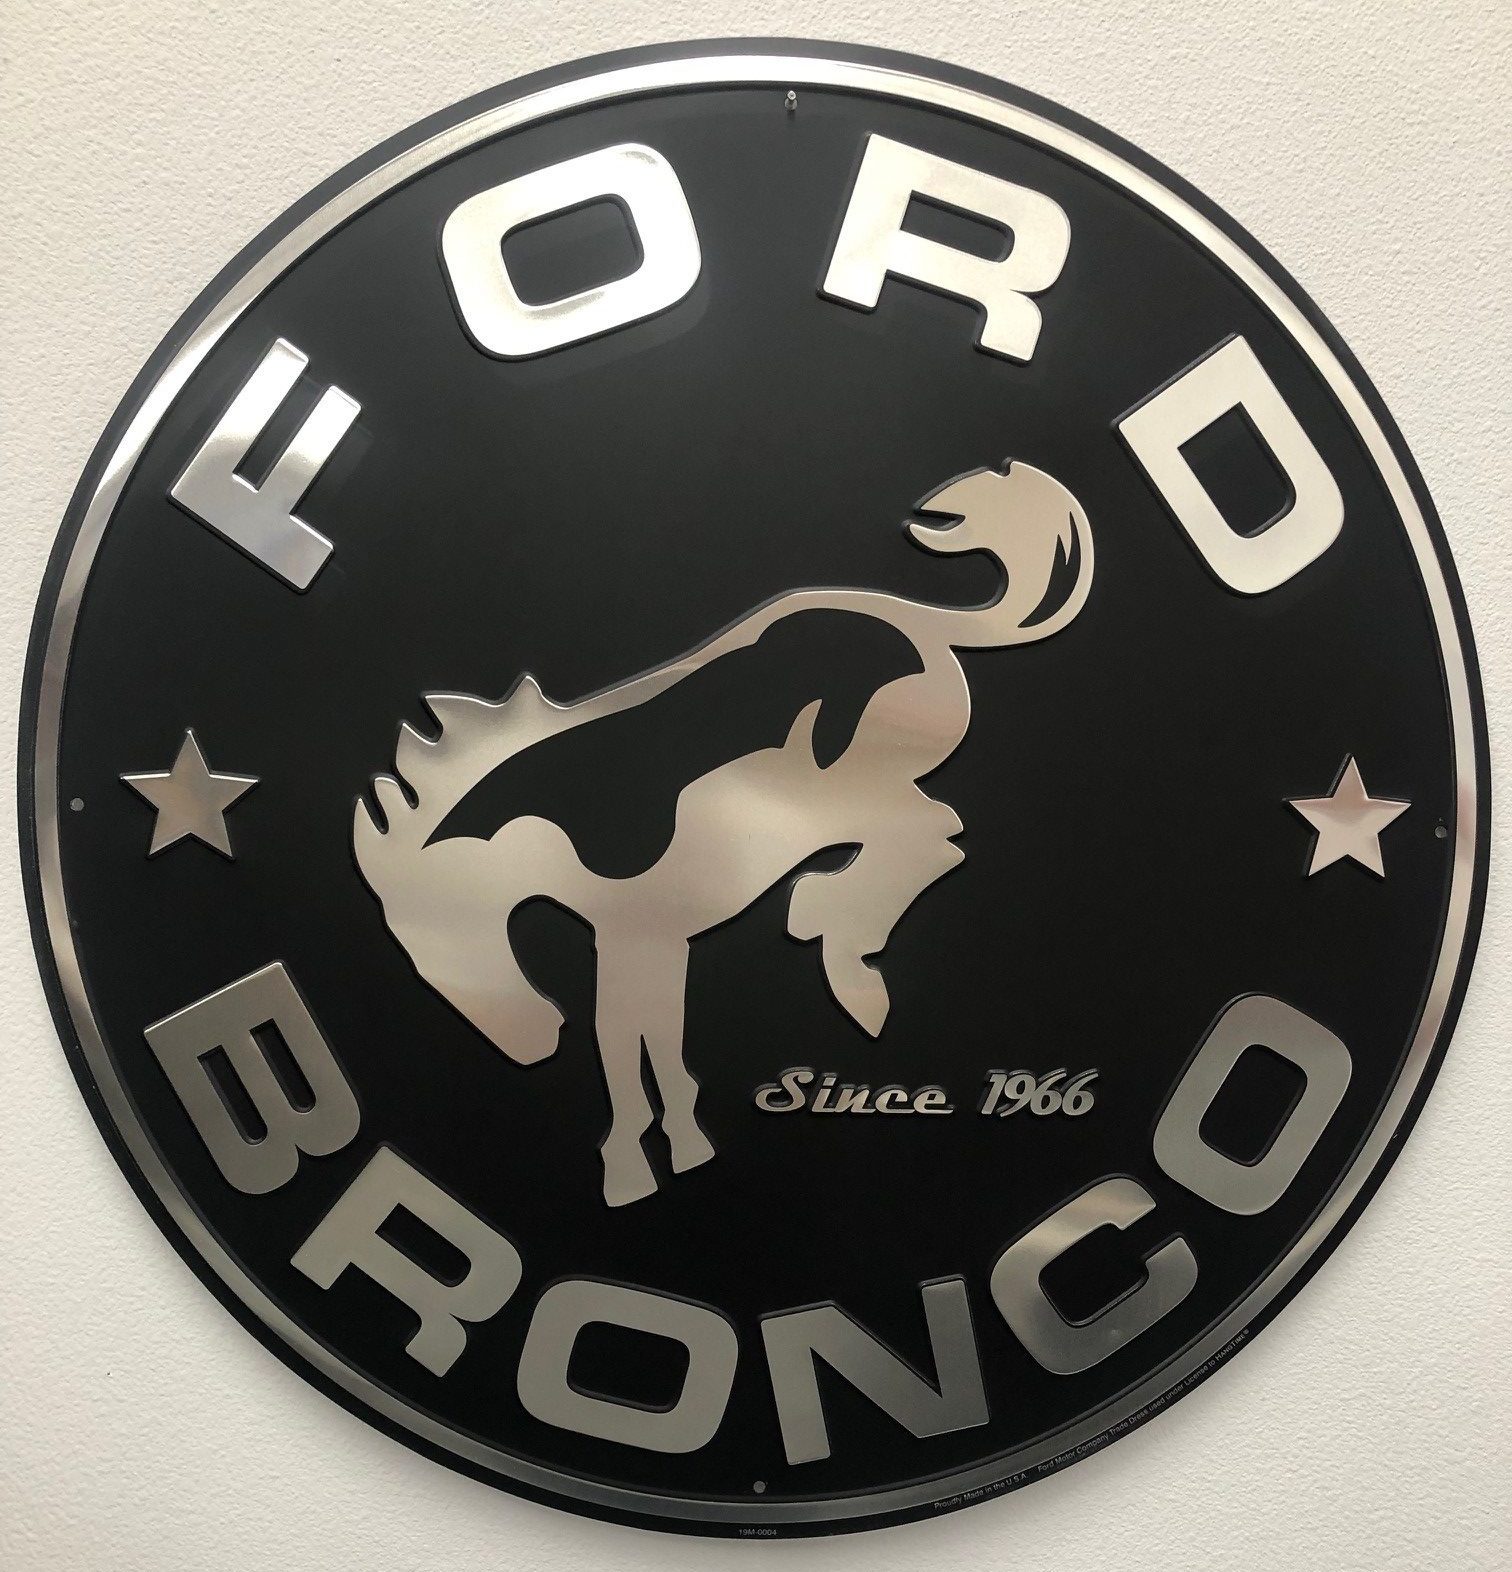 24" Ford Bronco Sign